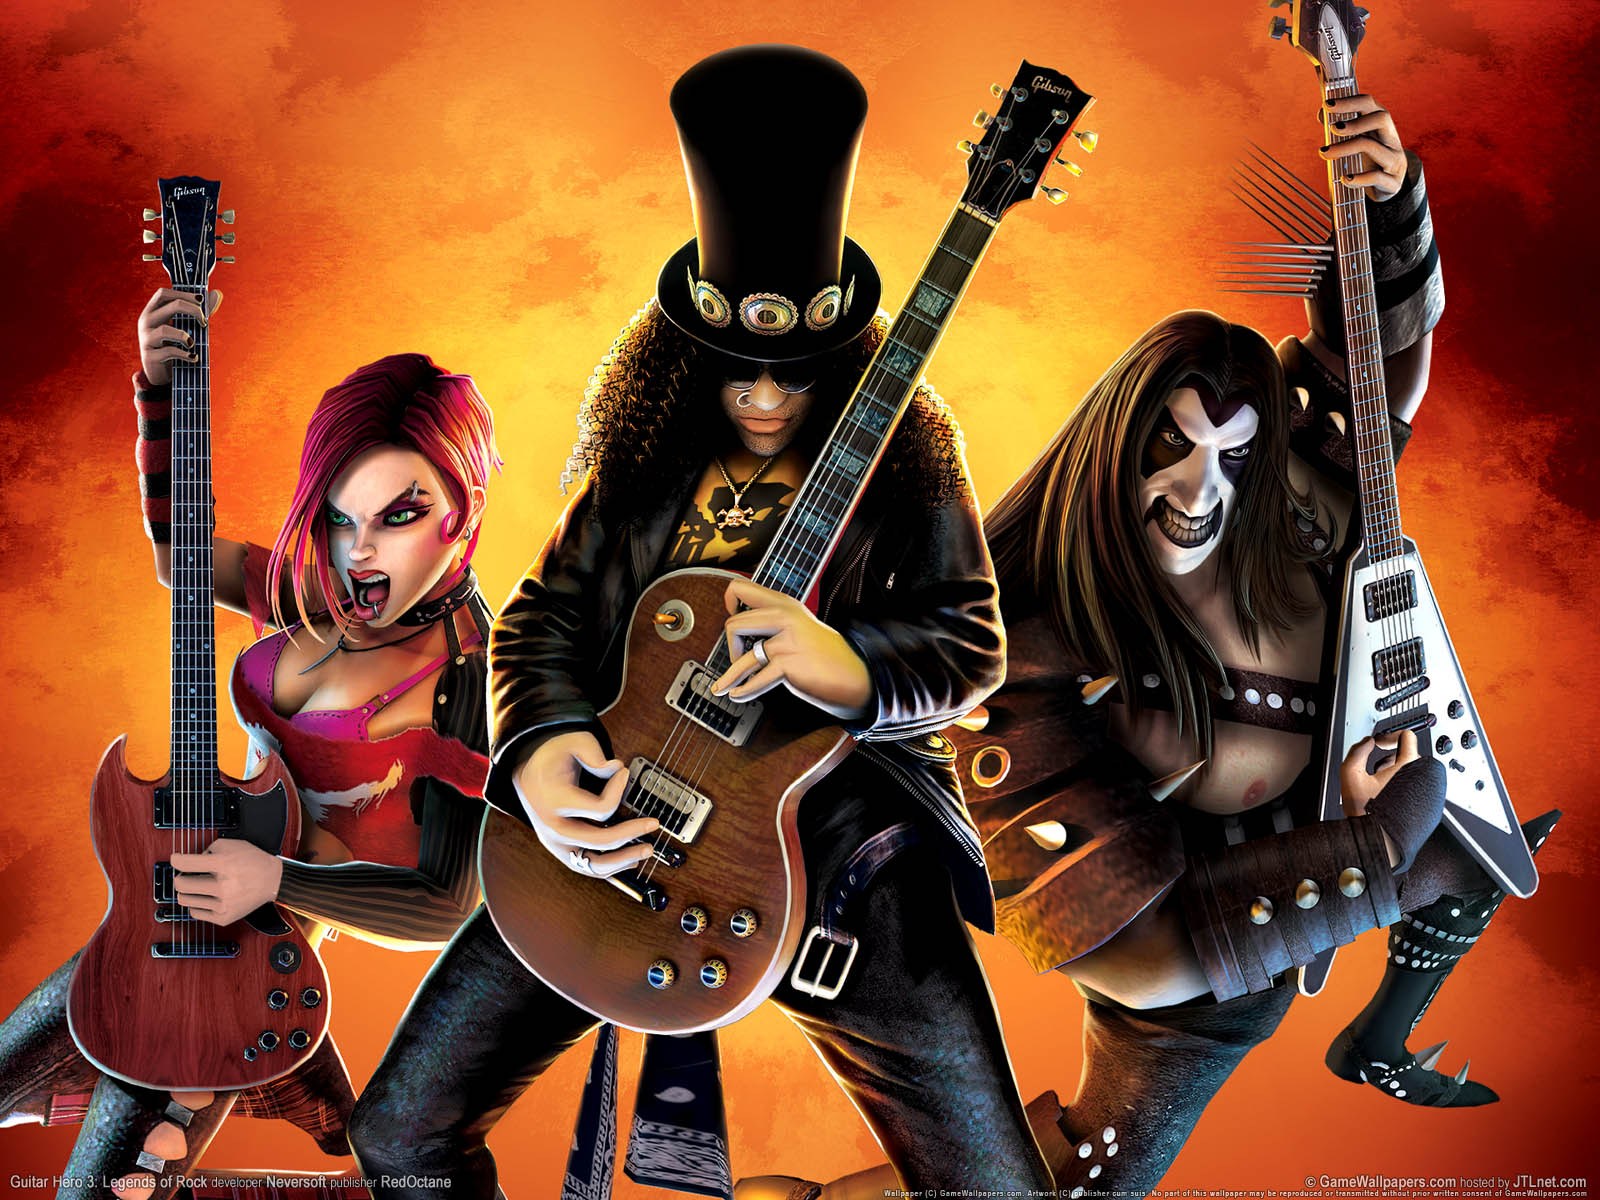 Guitar, Band and DJ Hero DLC will be terminated March 31st